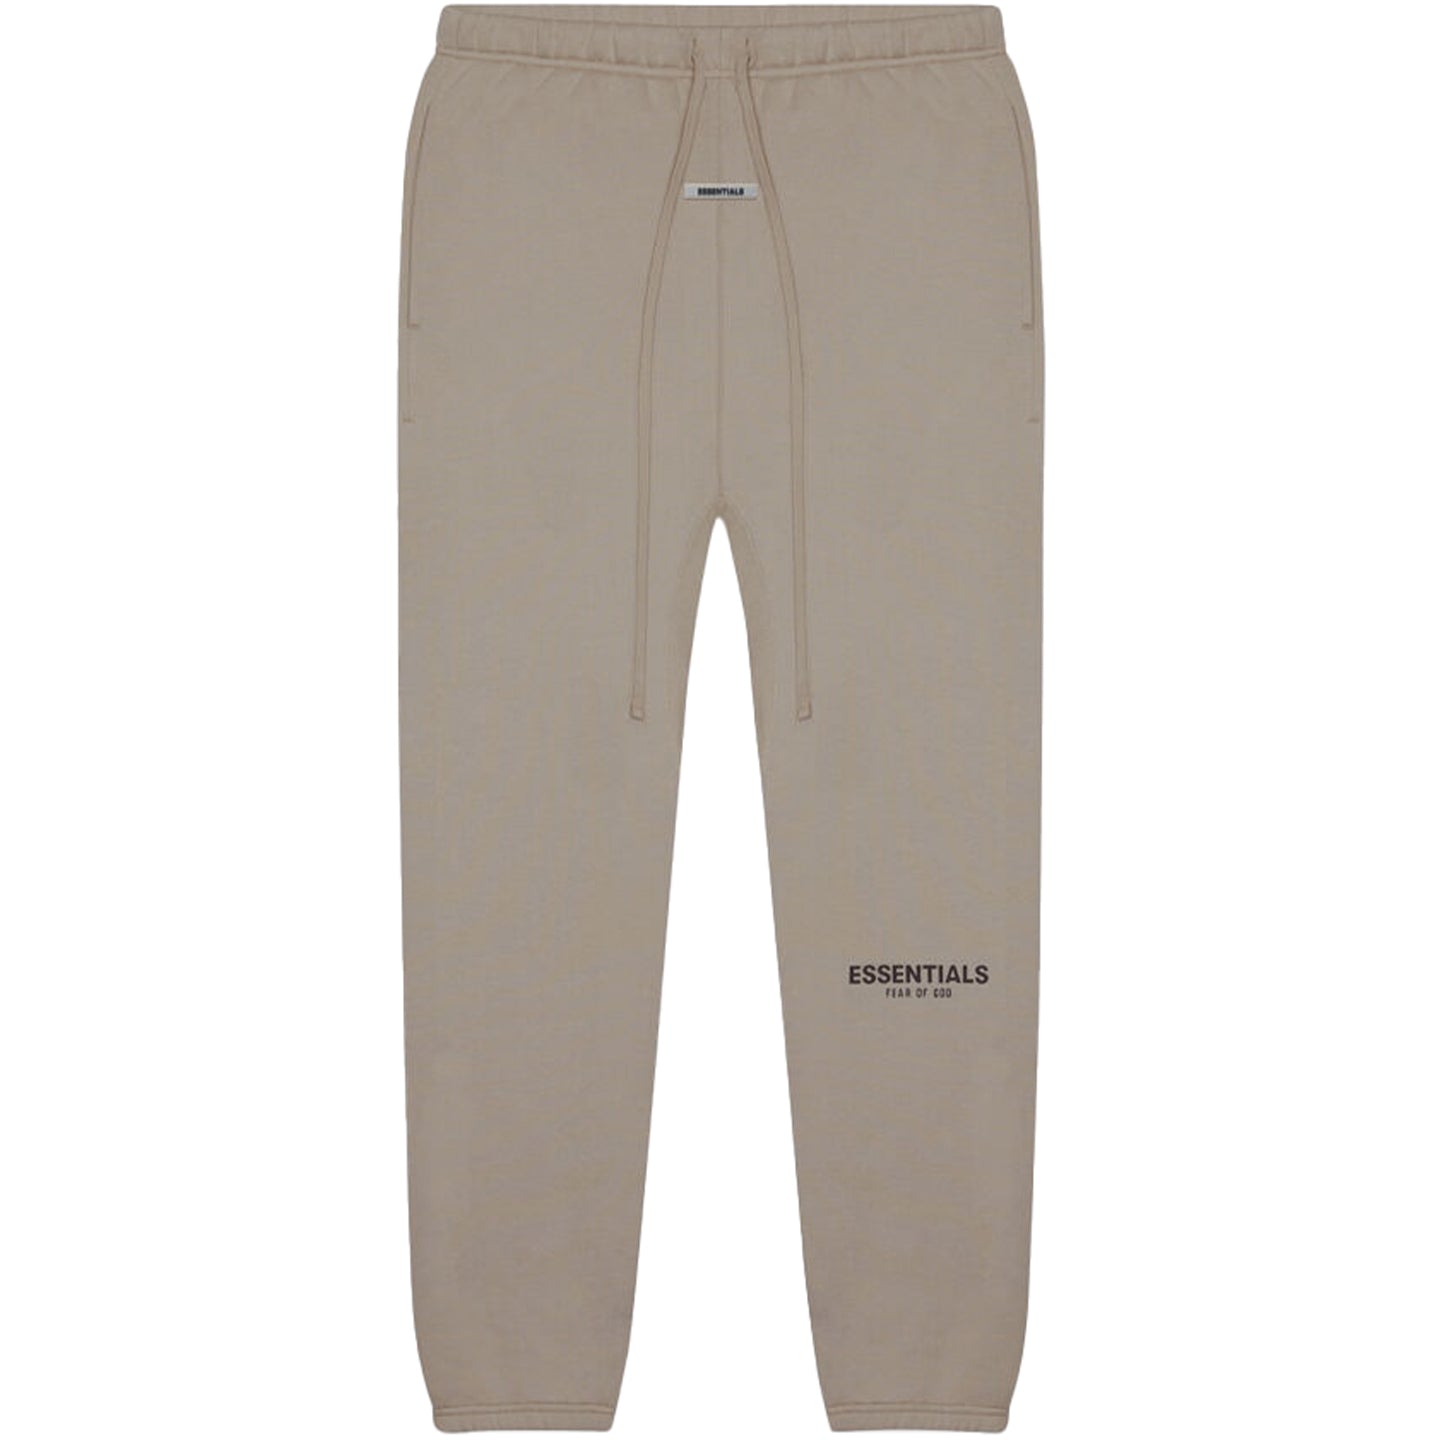 FEAR OF GOD ESSENTIALS SWEATPANT CEMENT – OBTAIND